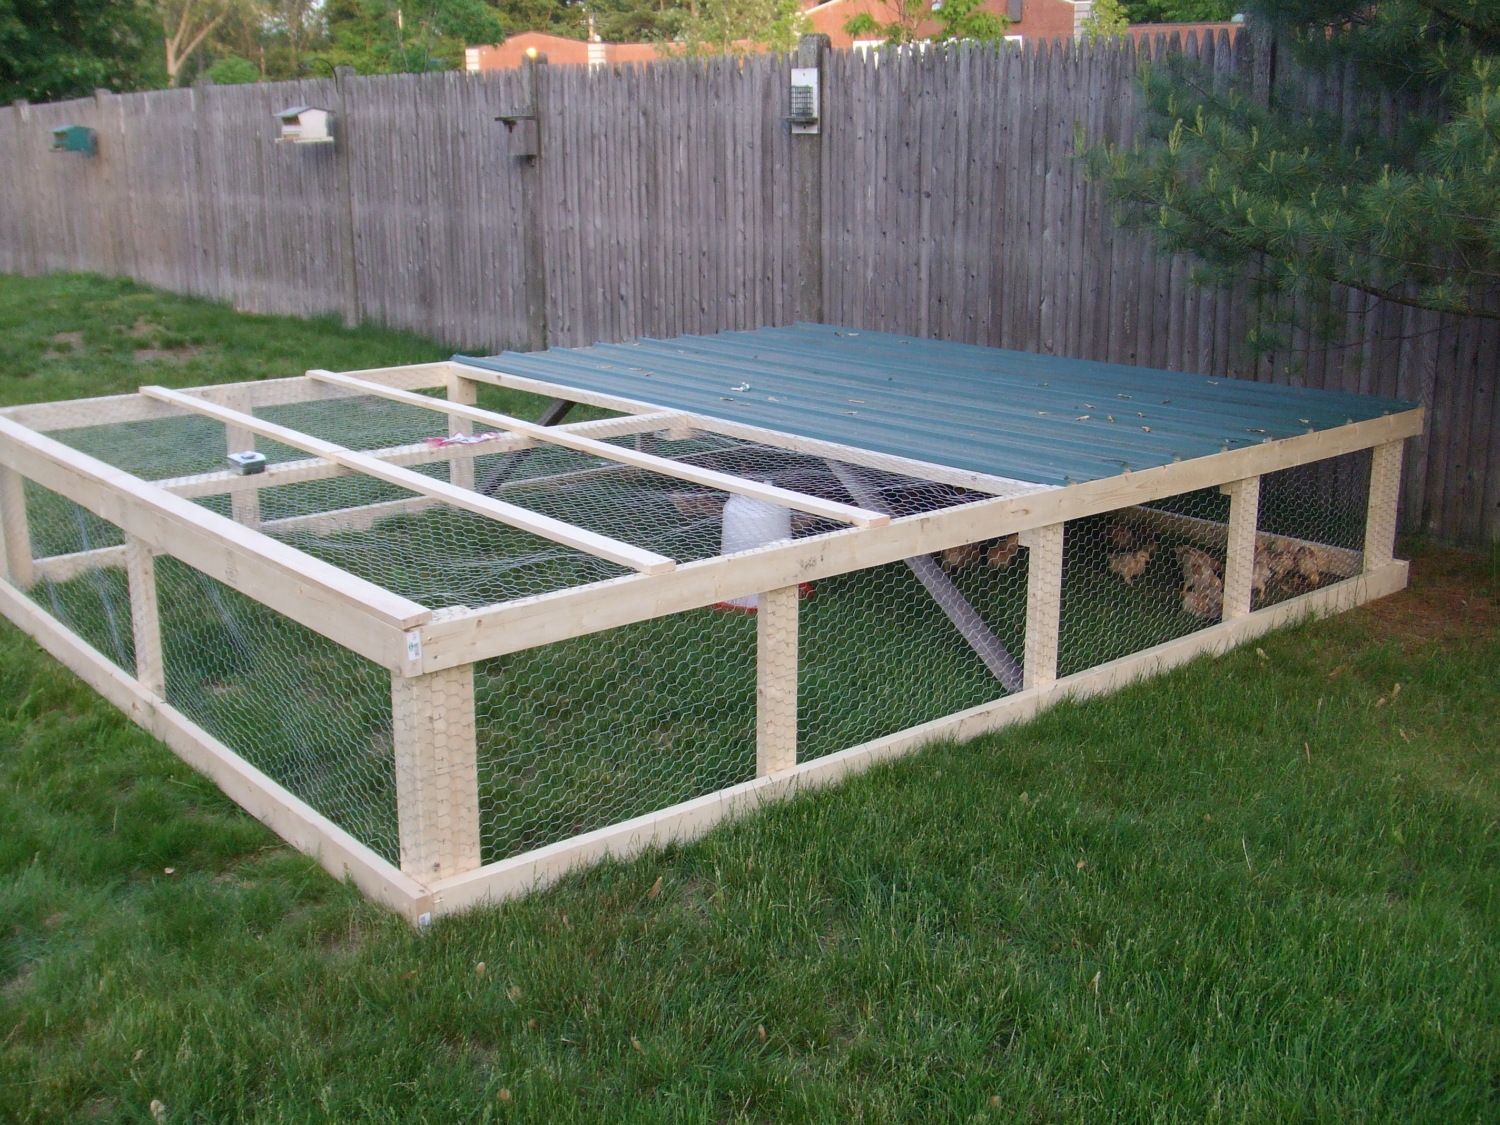 Short term use coops for meat chickens? Need coop advice!